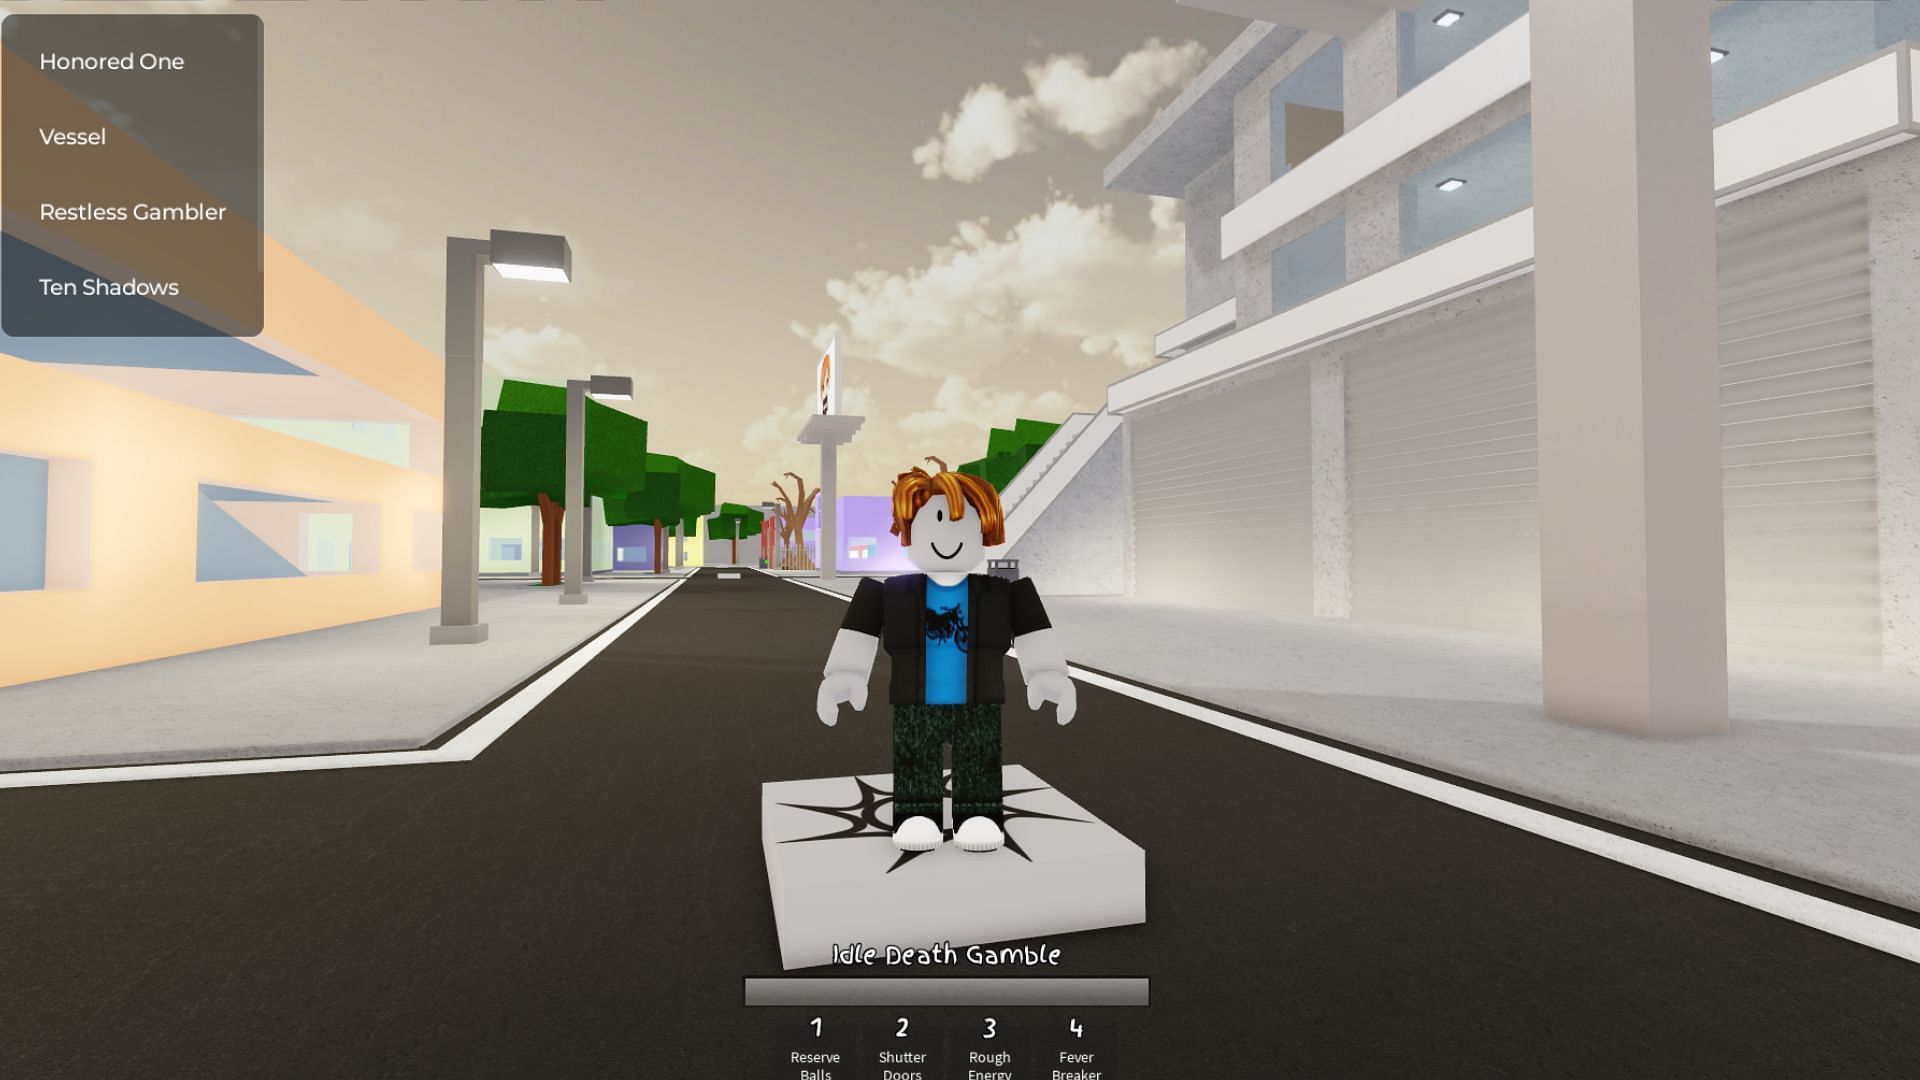 The Restless Gambler is a strong character in Jujutsu Shenanigans (Image via Roblox)